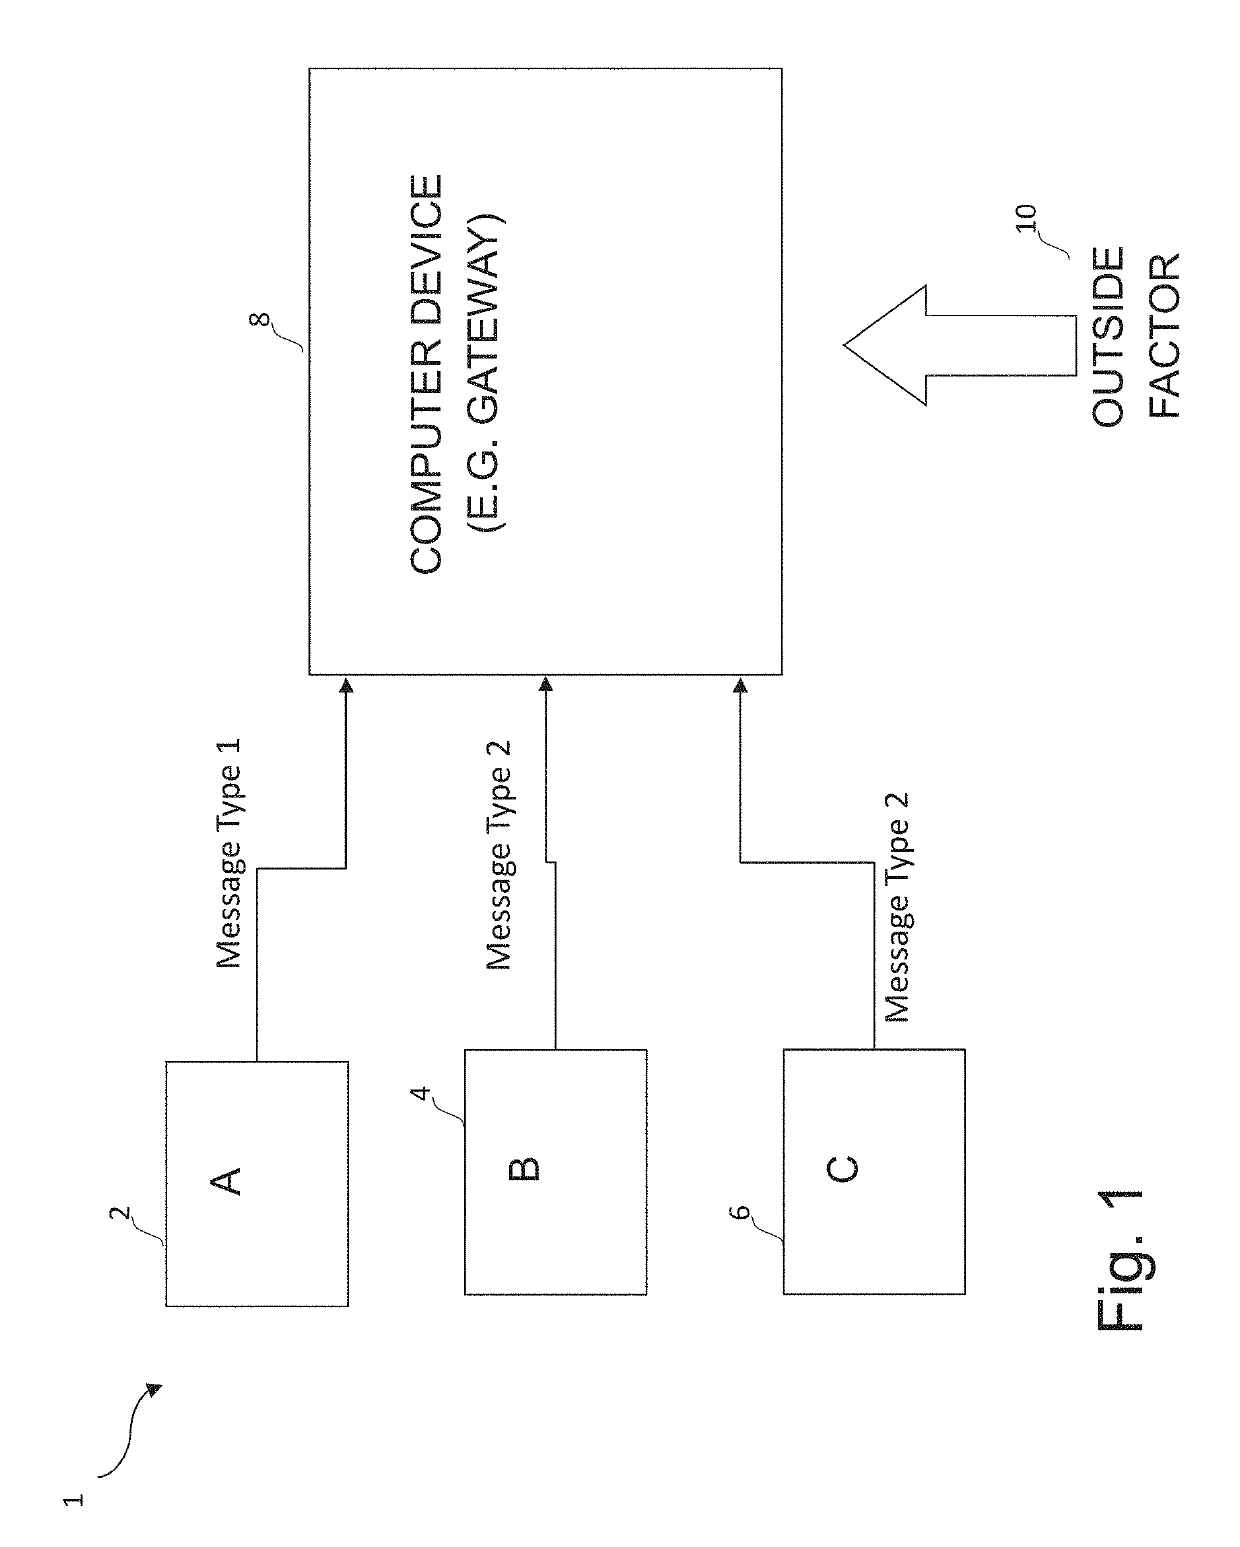 Data processing and analysis system and method